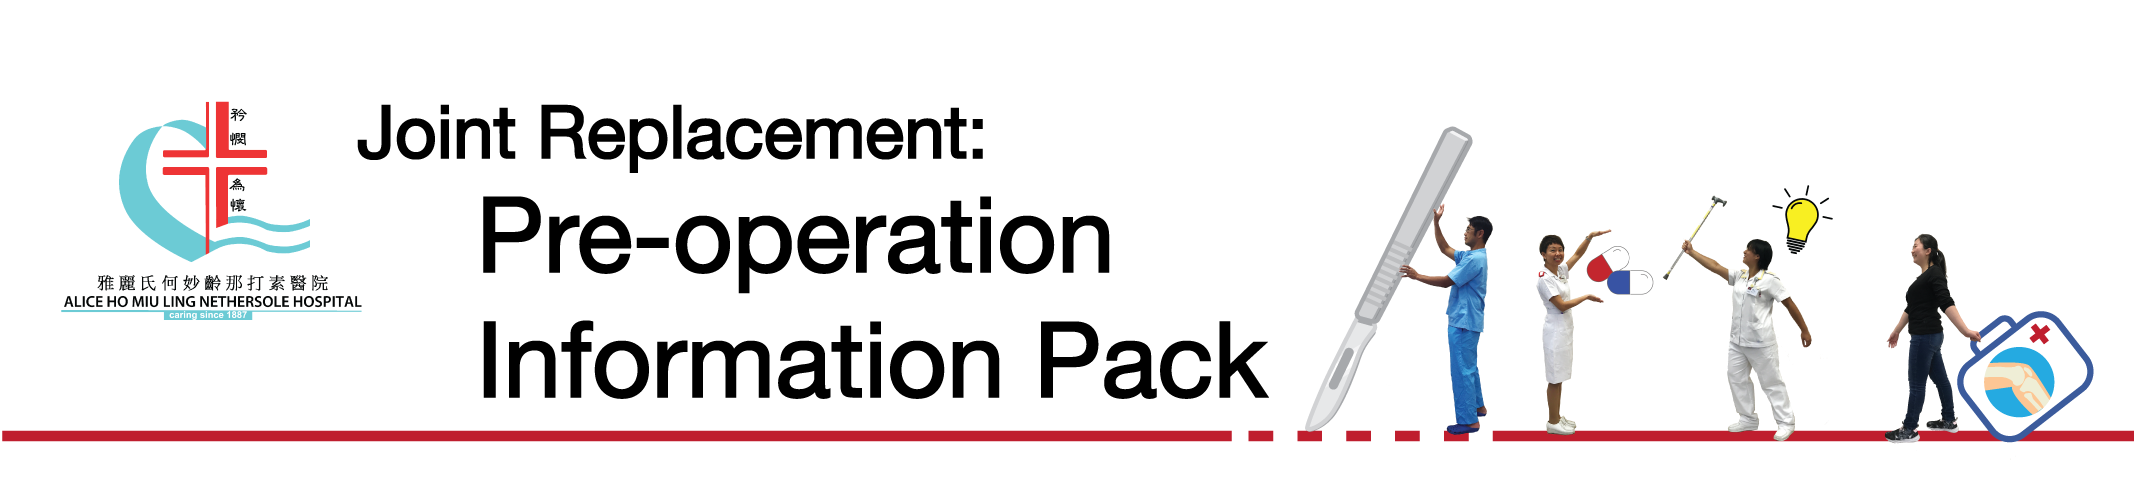 Joint Replacement Pre-operative Information Pack